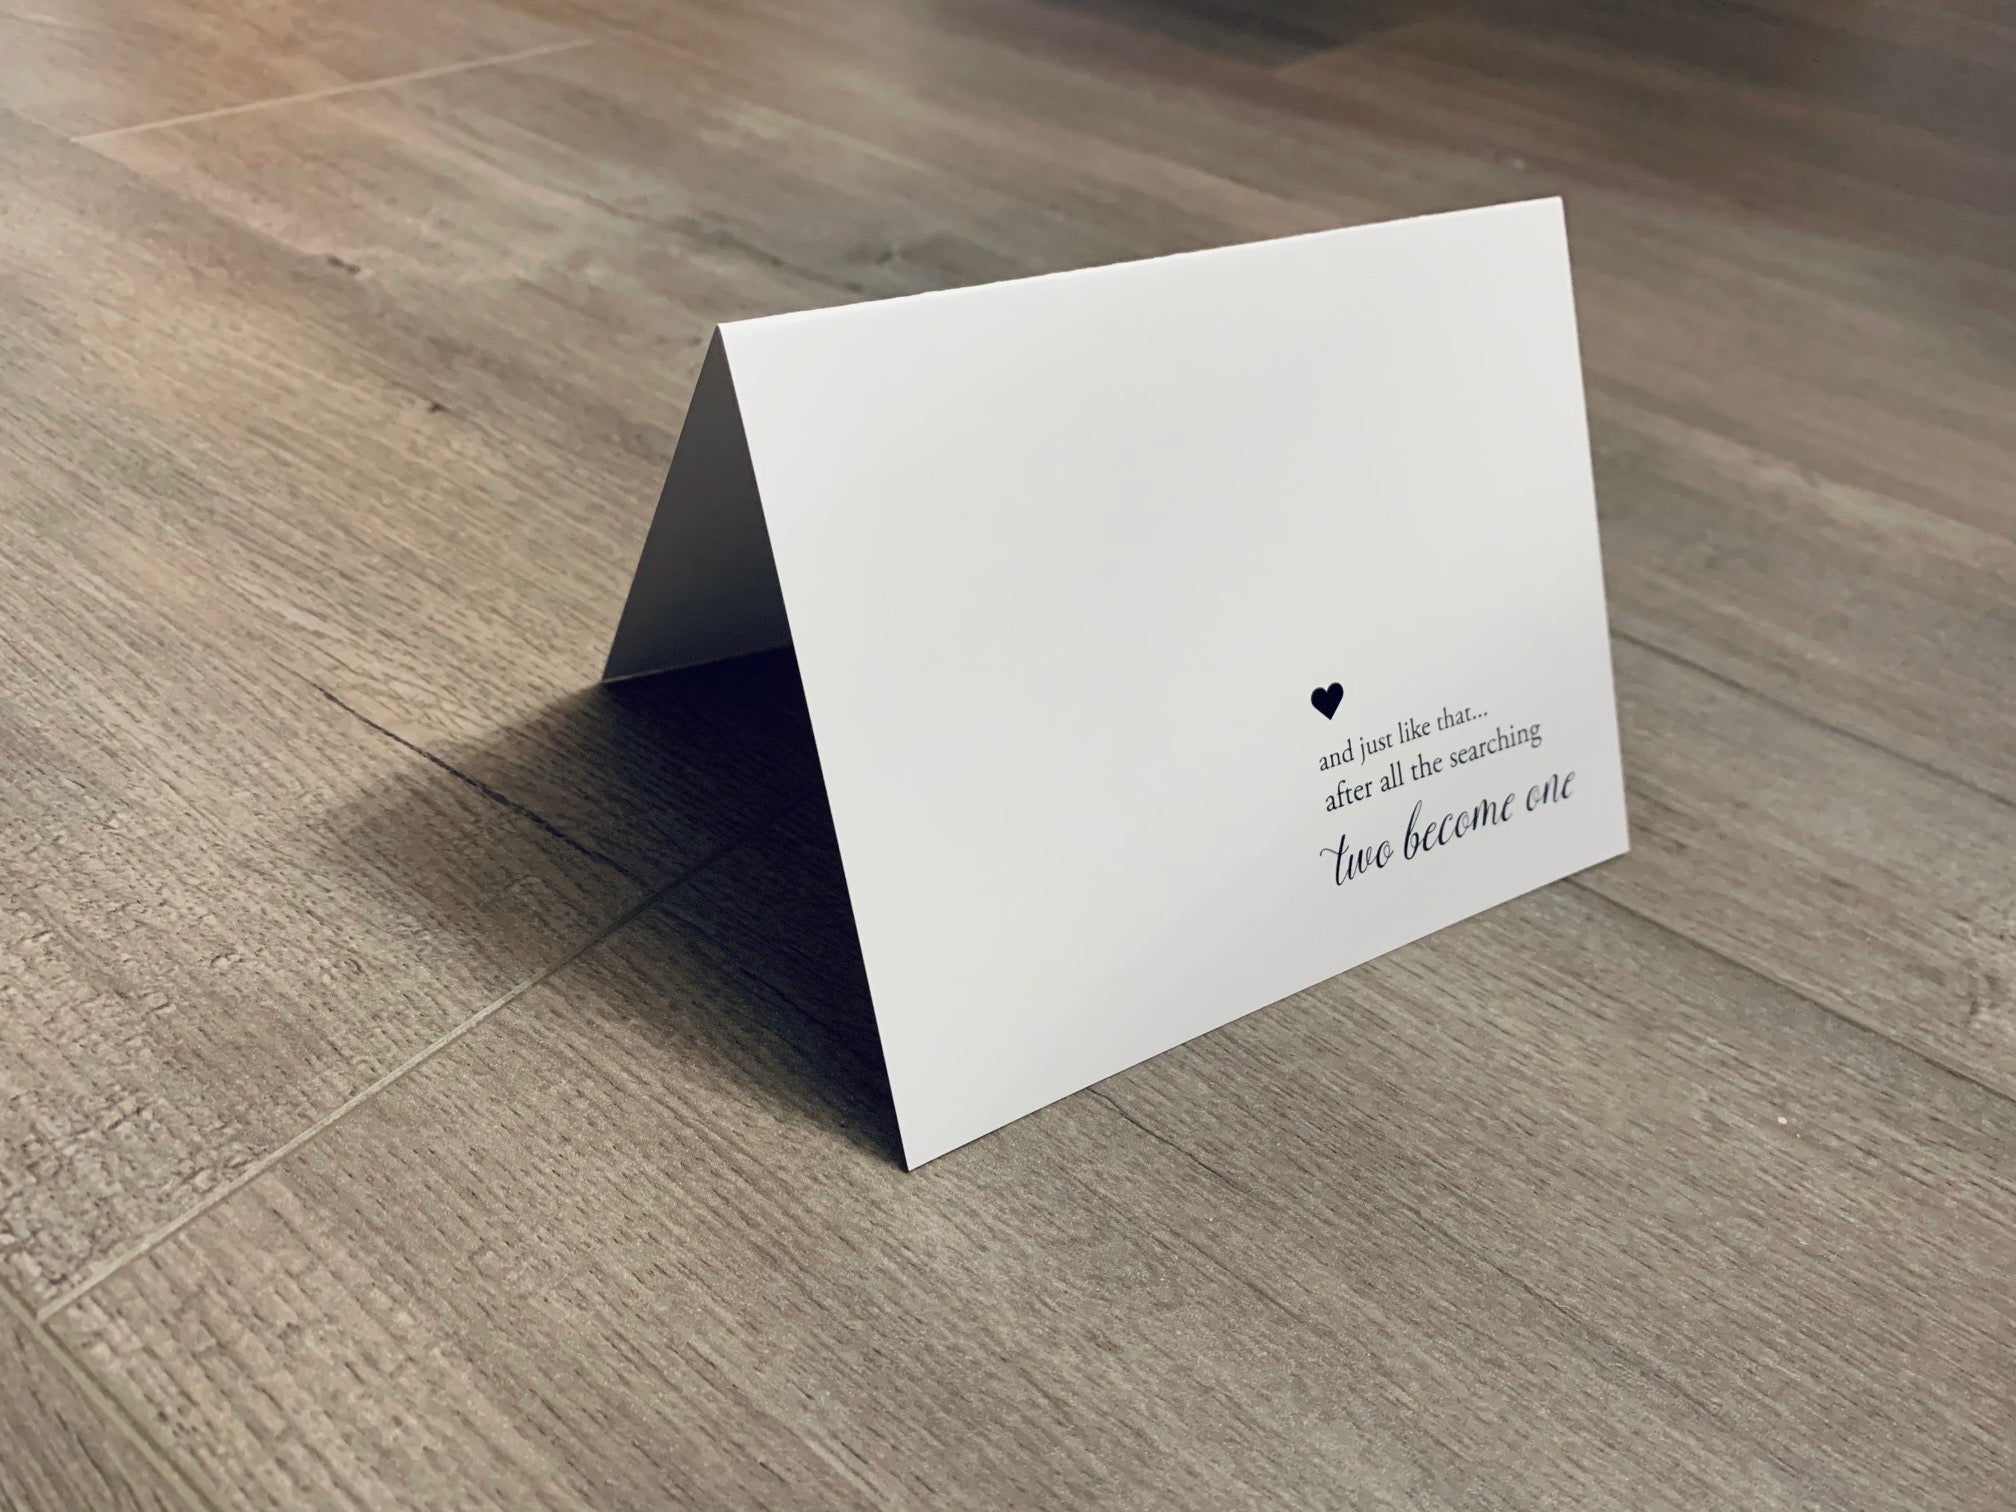 A white notecard with black ink is folded and propped up on a wooden floor. The card says, "and just like that... after all the searching two become one." Bridal and Wedding collection by Stationare.